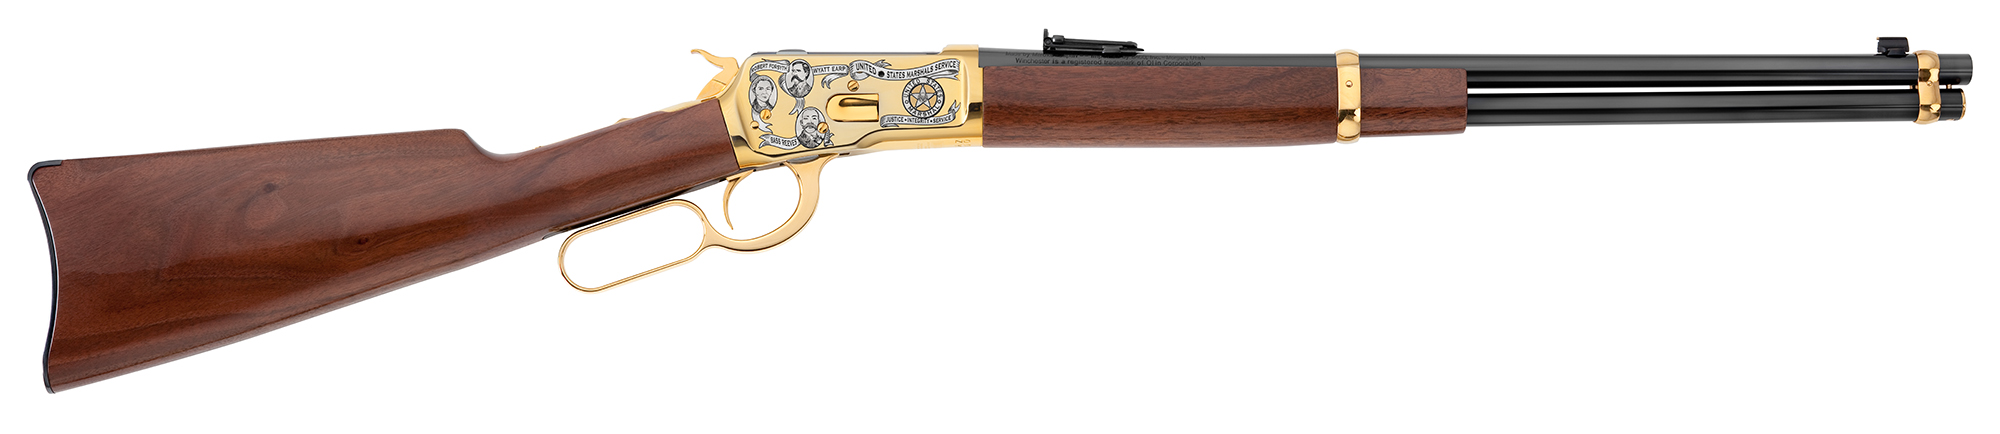 Winchester Rifle #15